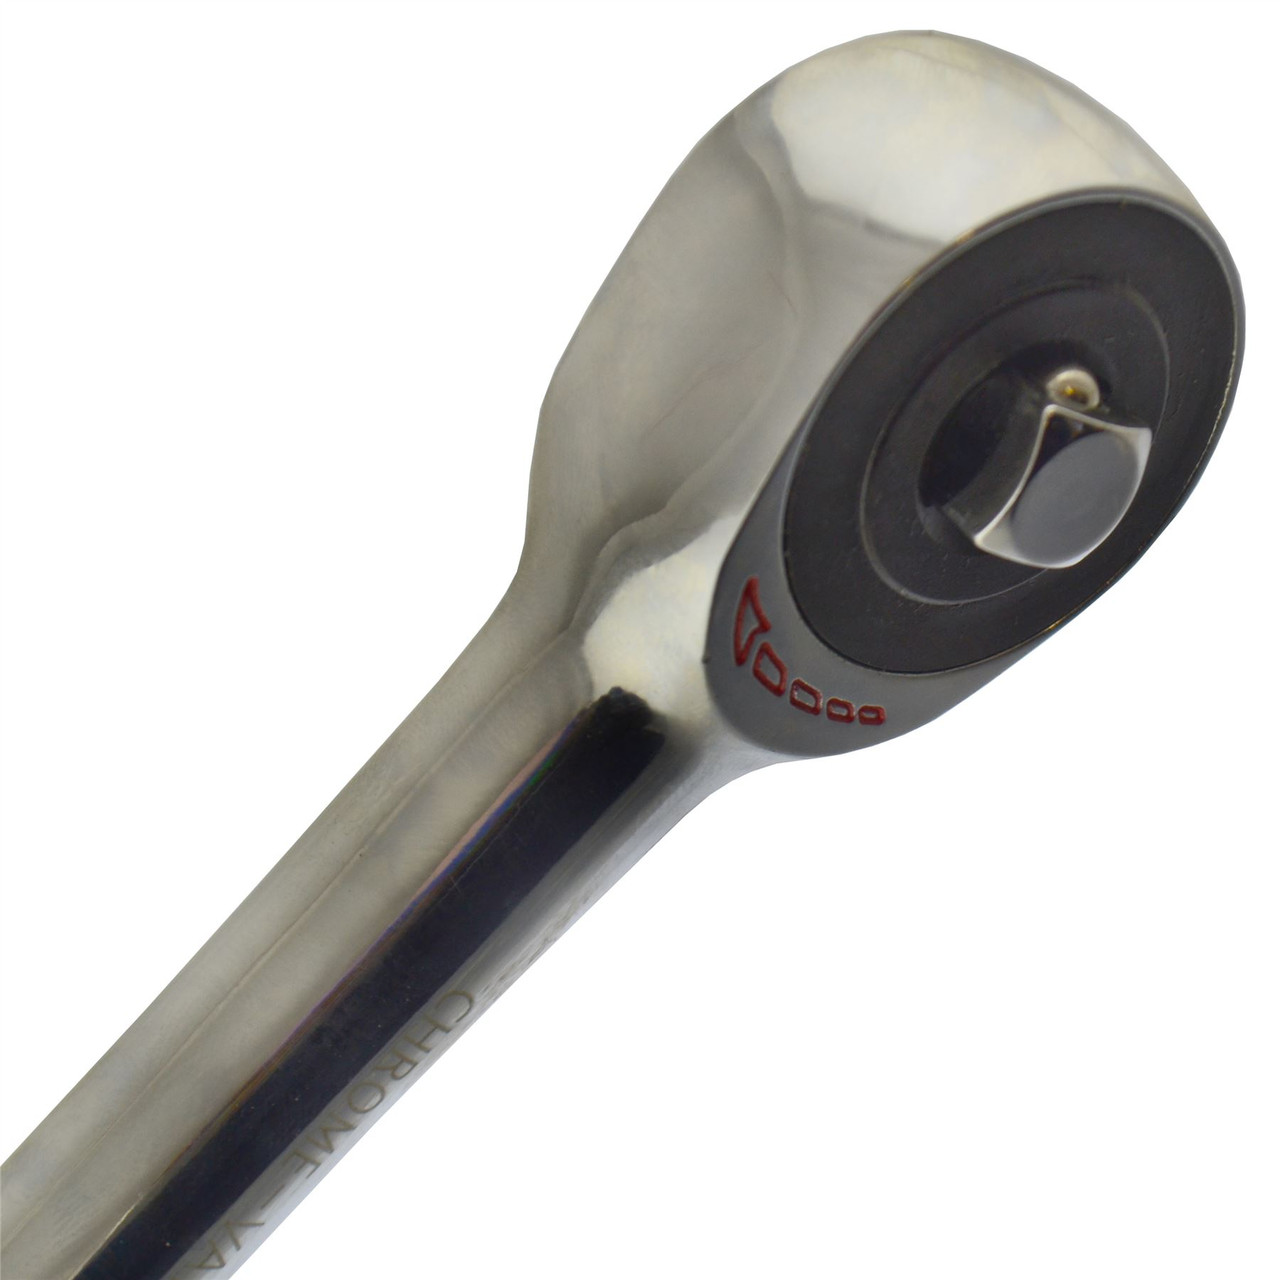 Details about   3/8" Drive Ratchet Williams Two Way Twister Swivel Handle Turn Ratchet Socket 